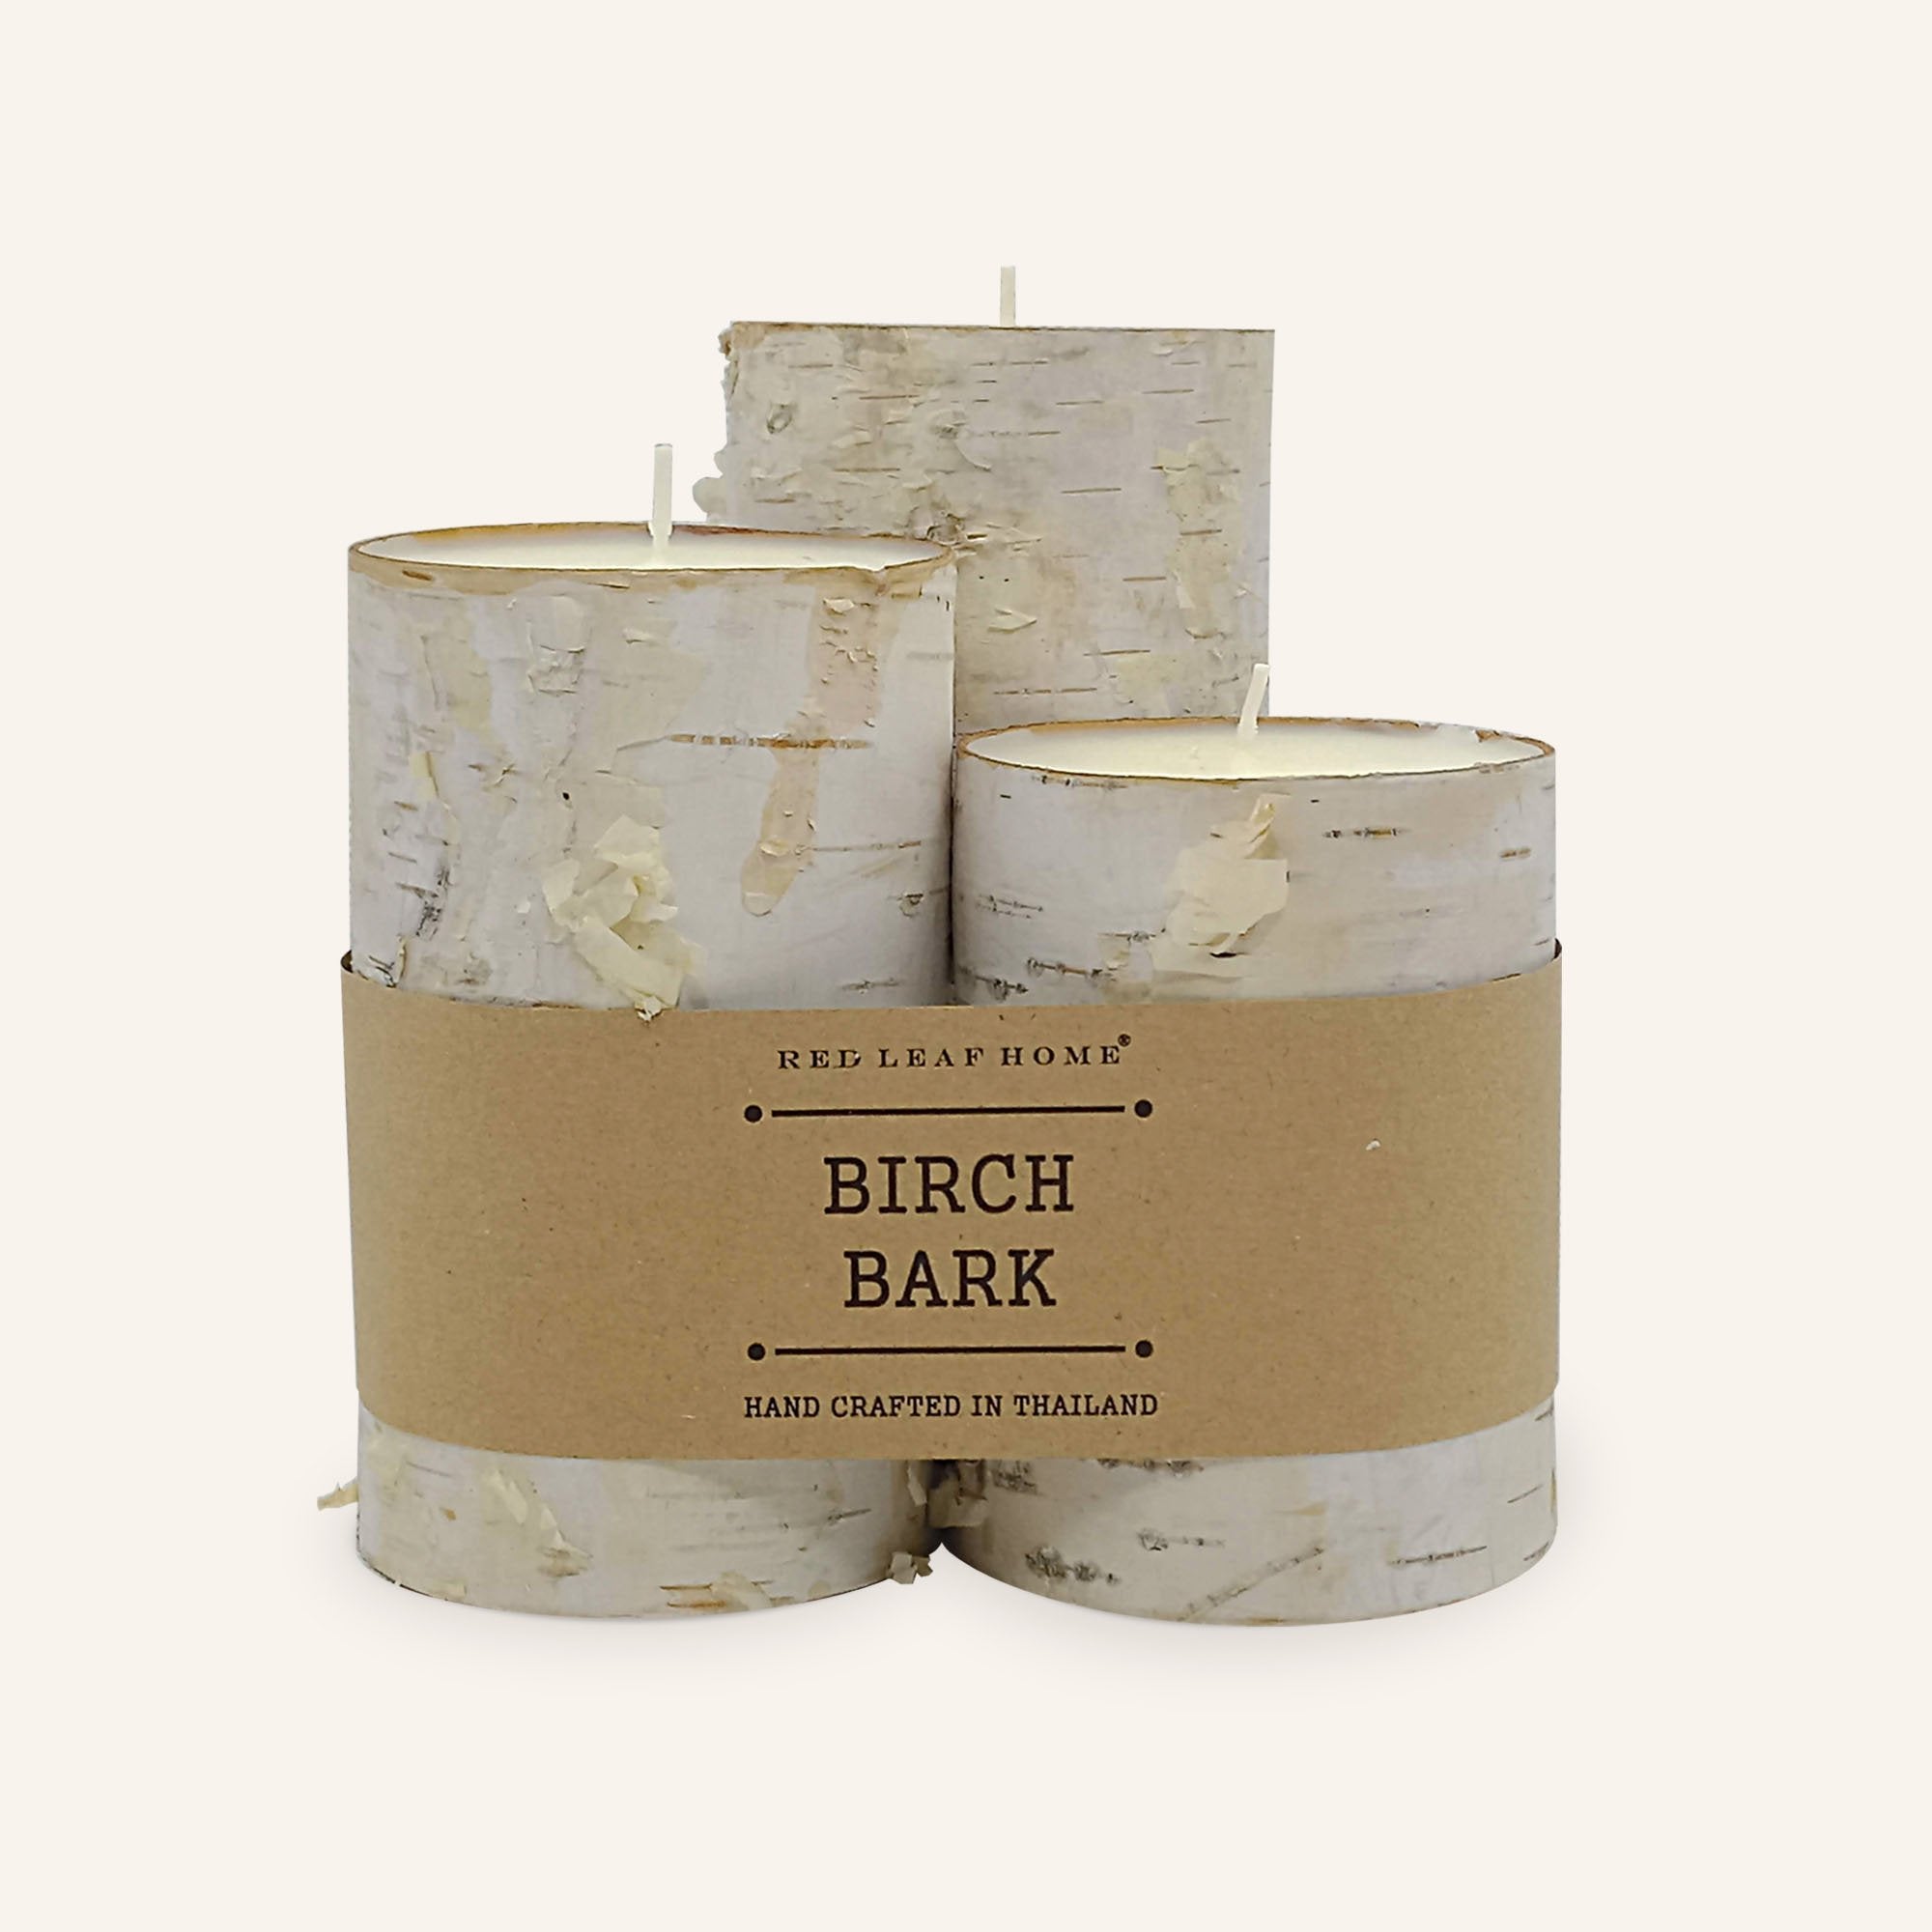 Three Birch-bark candles rapped in a brown paper label that reads, "Red Leaf Home. Birch Bark. Hand crafted in Thailand."